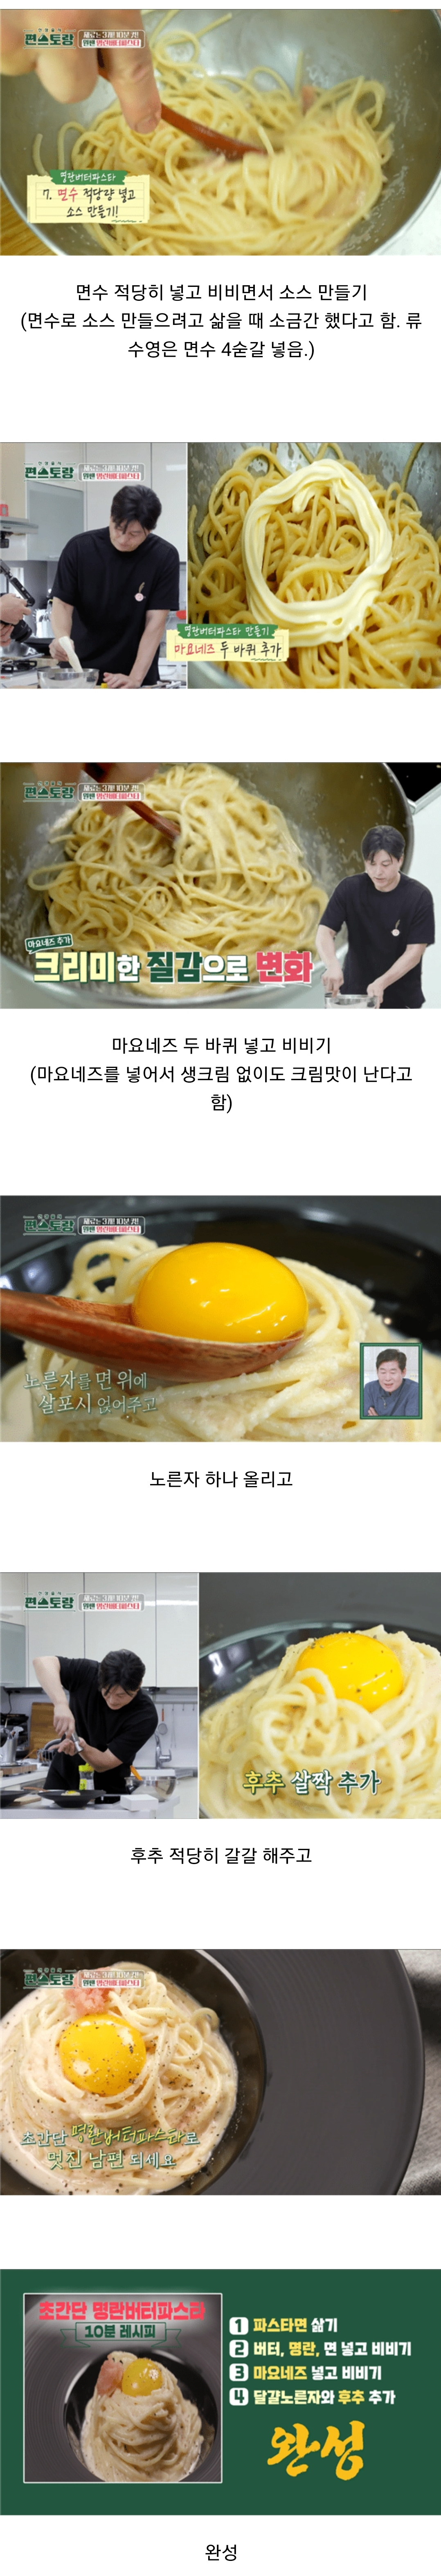 Ryu Sooyoung's pollack pasta is easy but delicious